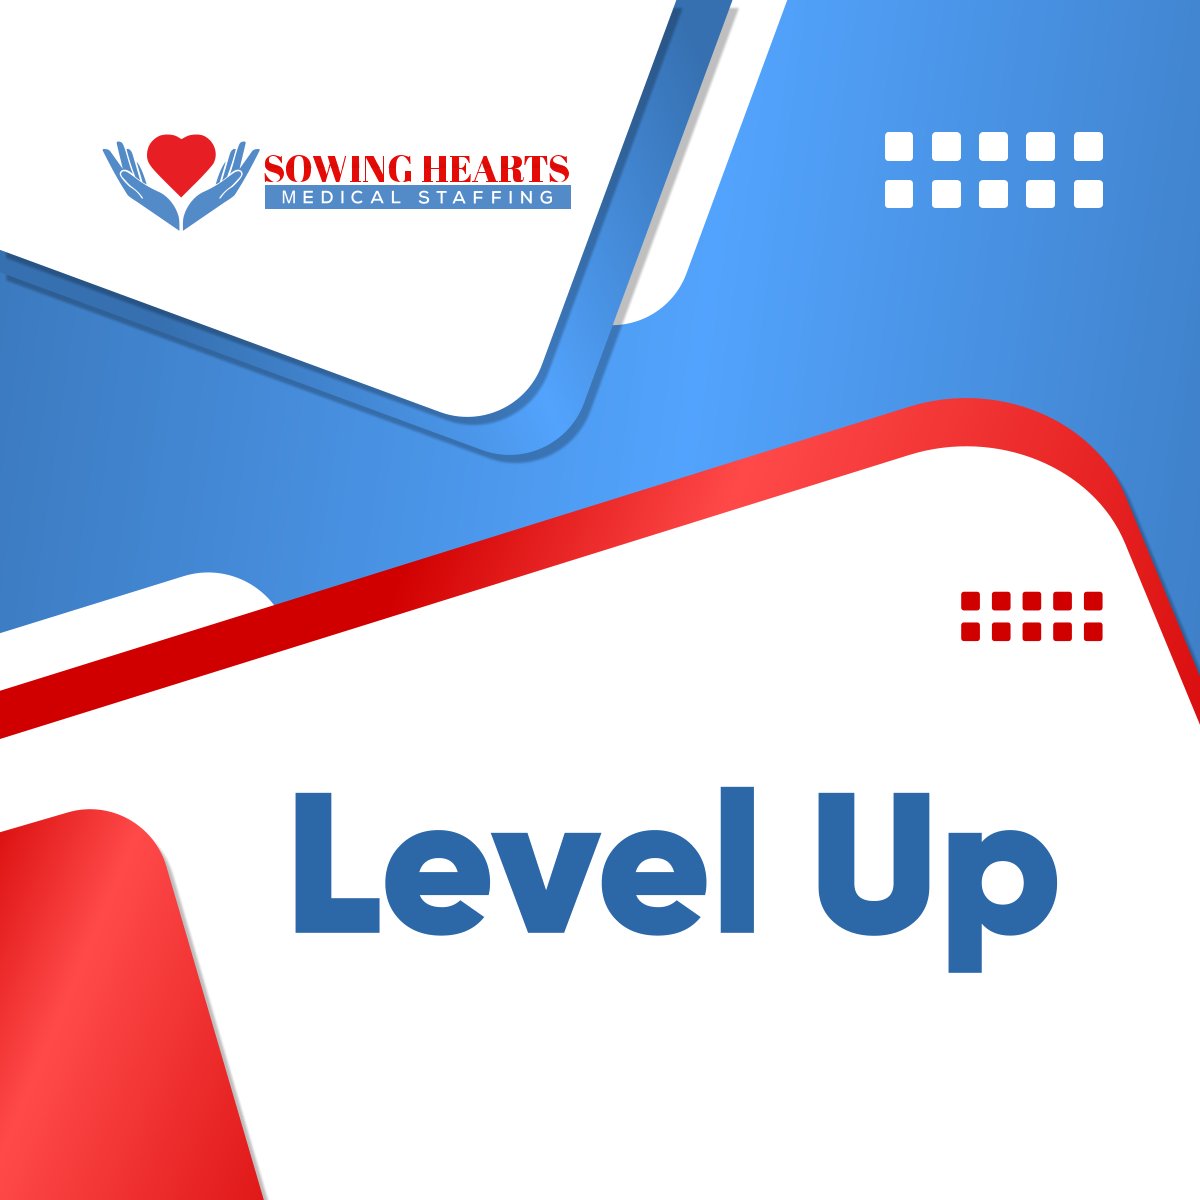 Increase the efficiency and effectiveness of your facility's operations by hiring the right people to run the facility and take care of your patients. Let us help you level up your facility.

#BocaRatonFL #HealthcareStaffing #Facility #LevelUp